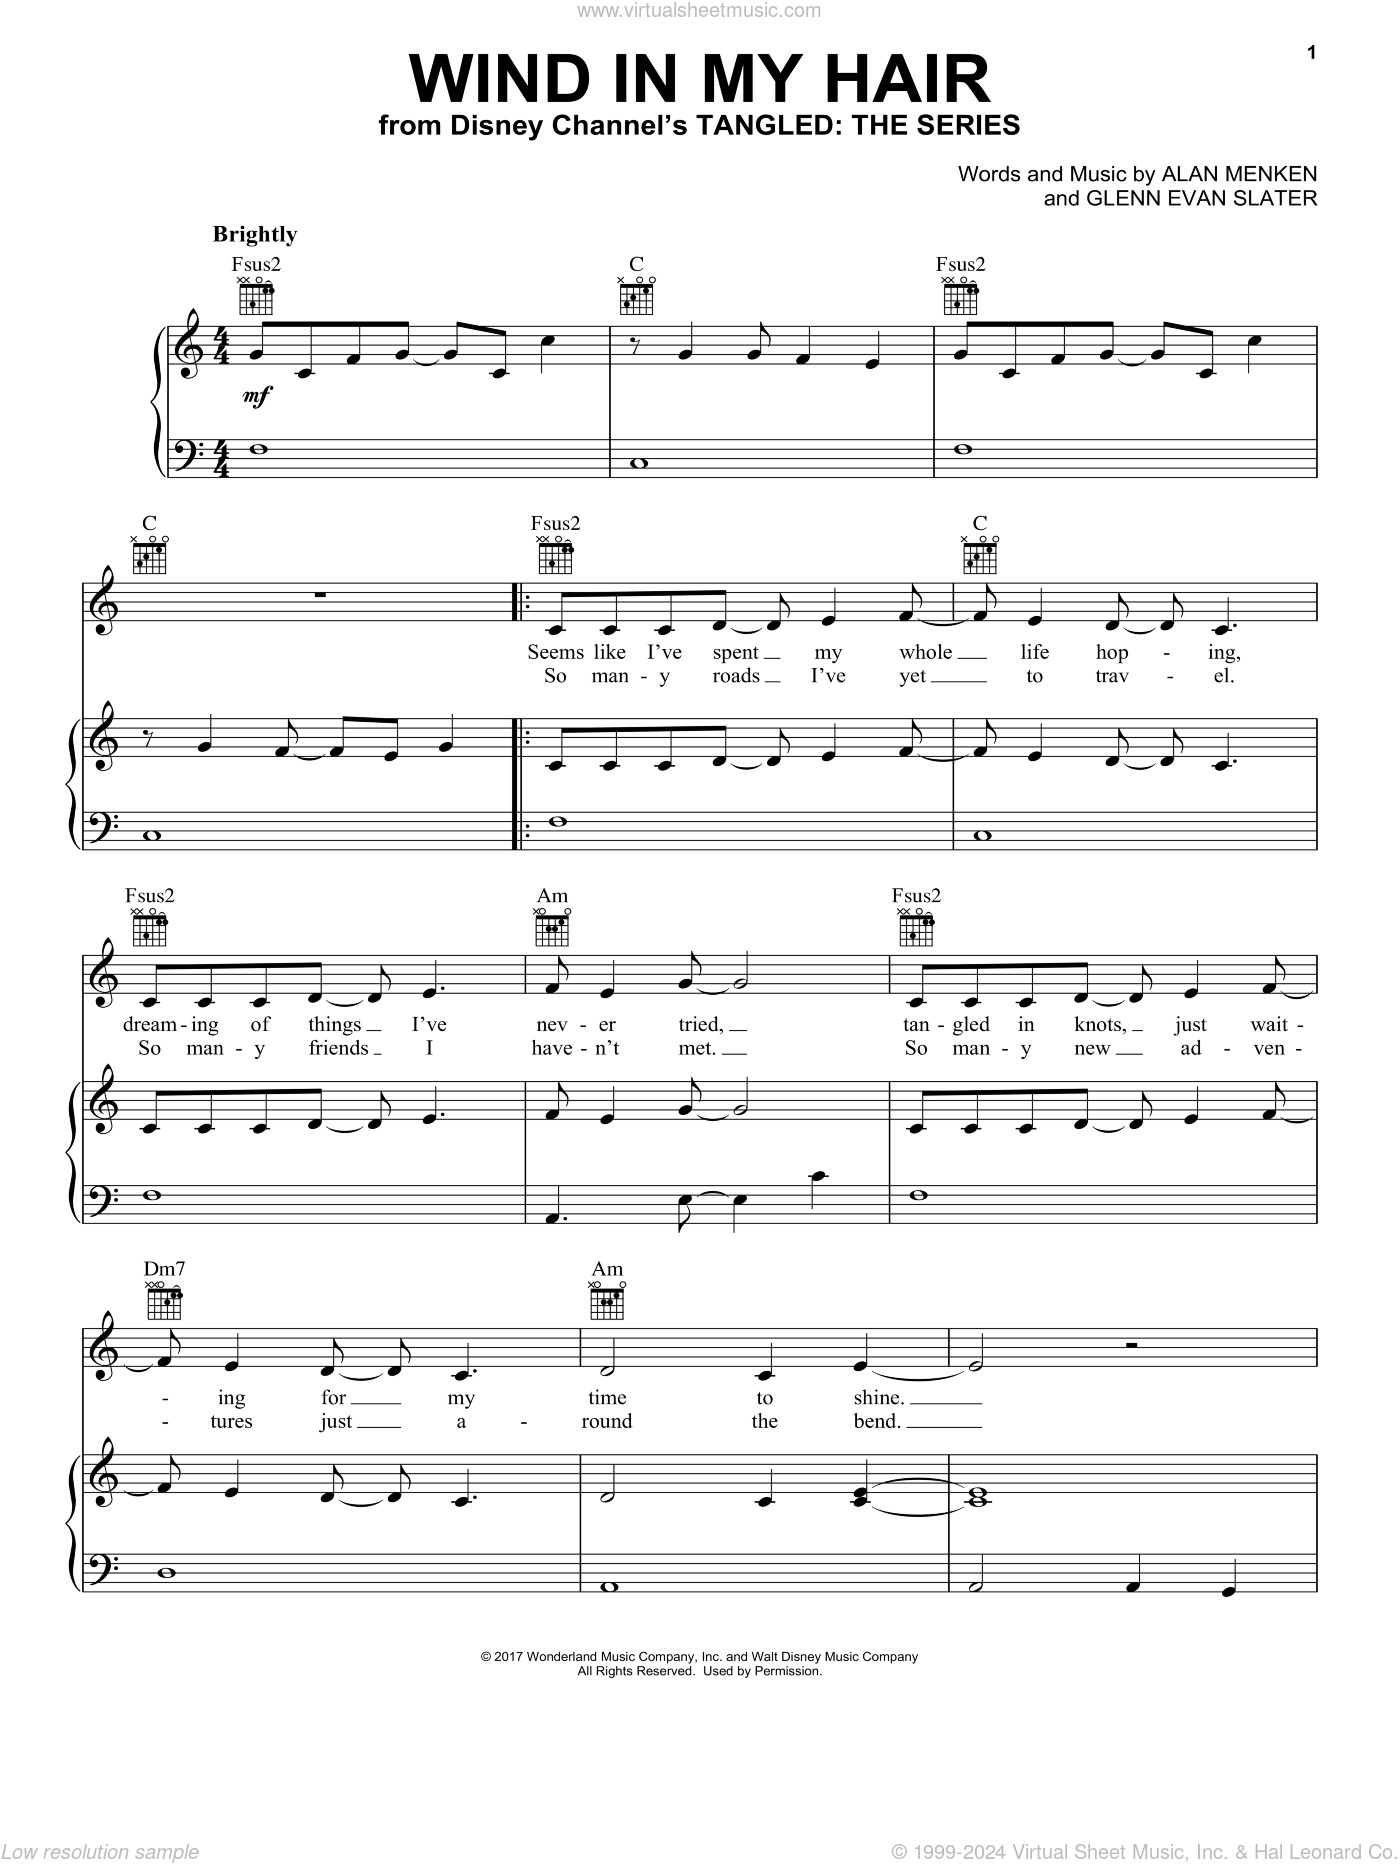 Menken - Wind In My Hair (from Tangled: The Series) sheet music for voice,  piano or guitar